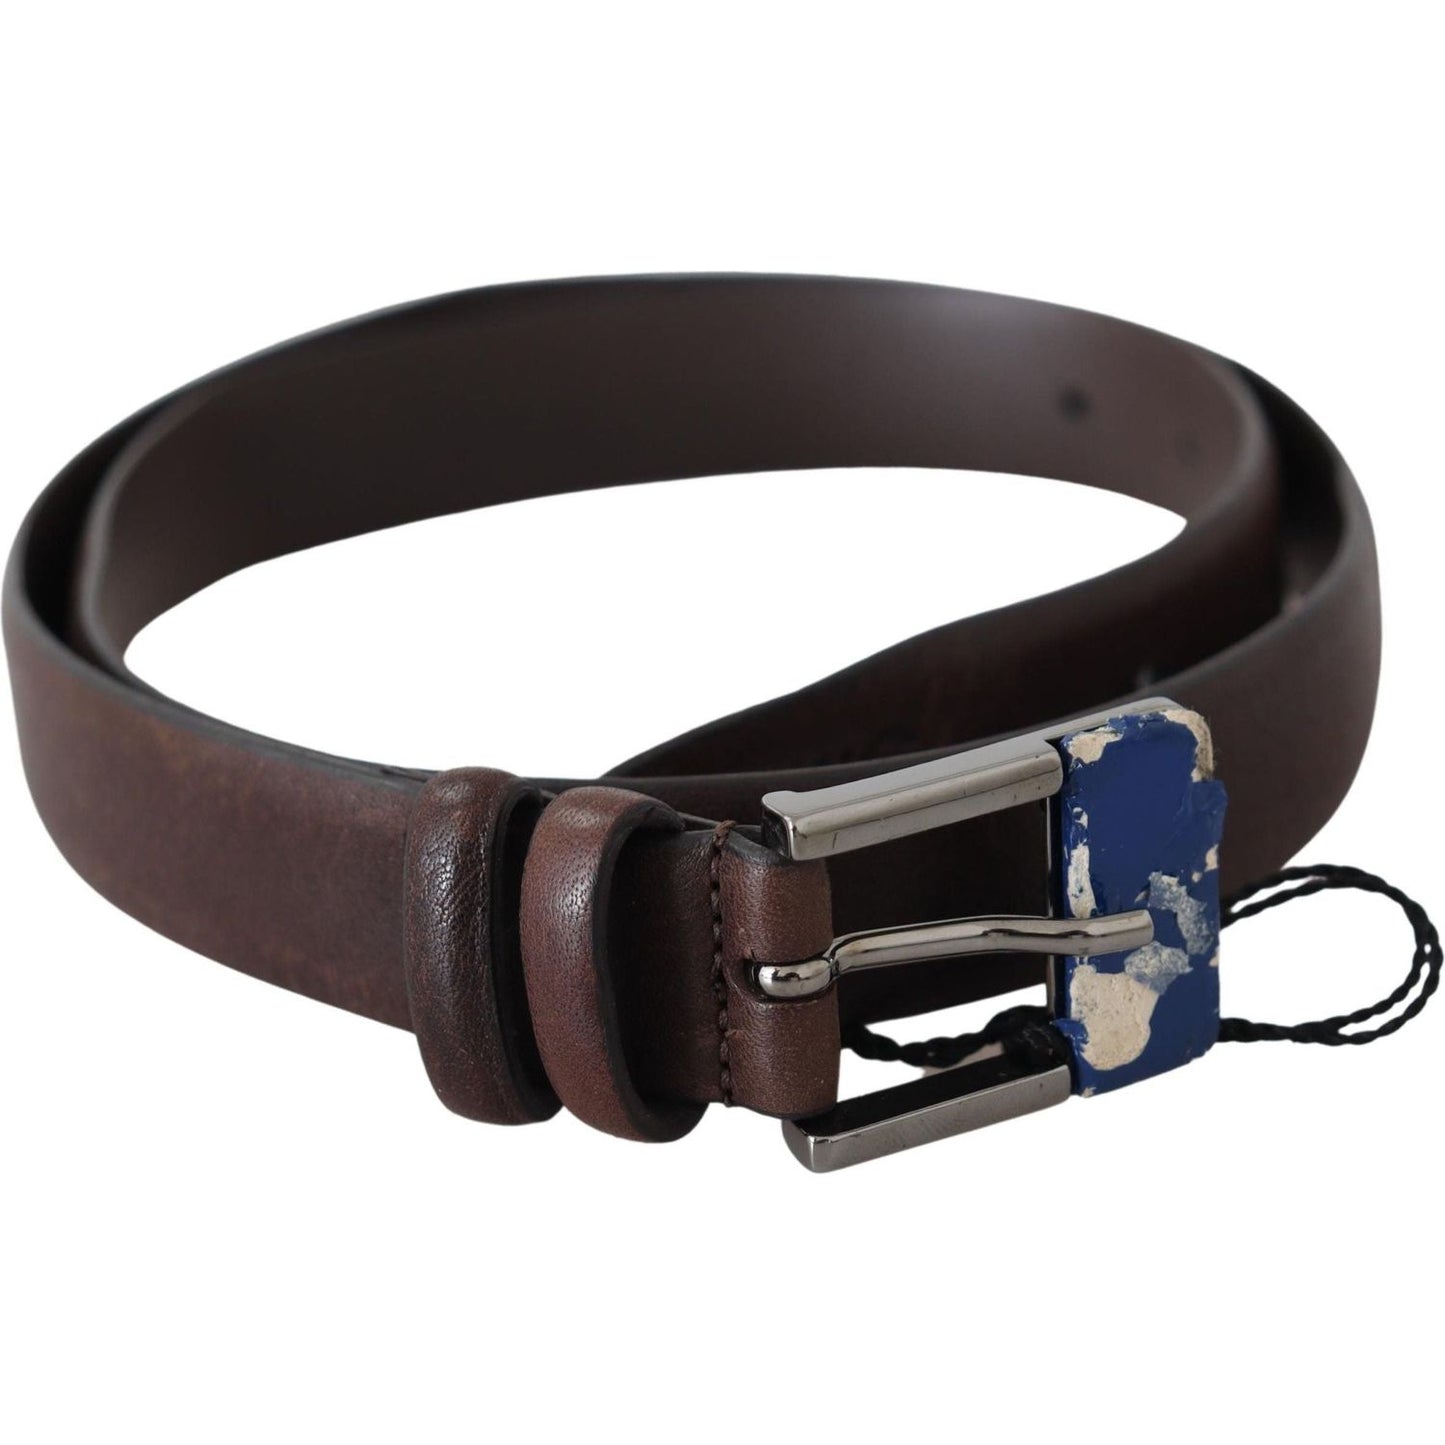 Costume National Elegant Brown Leather Classic Belt with Silver-Tone Buckle Belt brown-genuine-leather-silver-buckle-belt